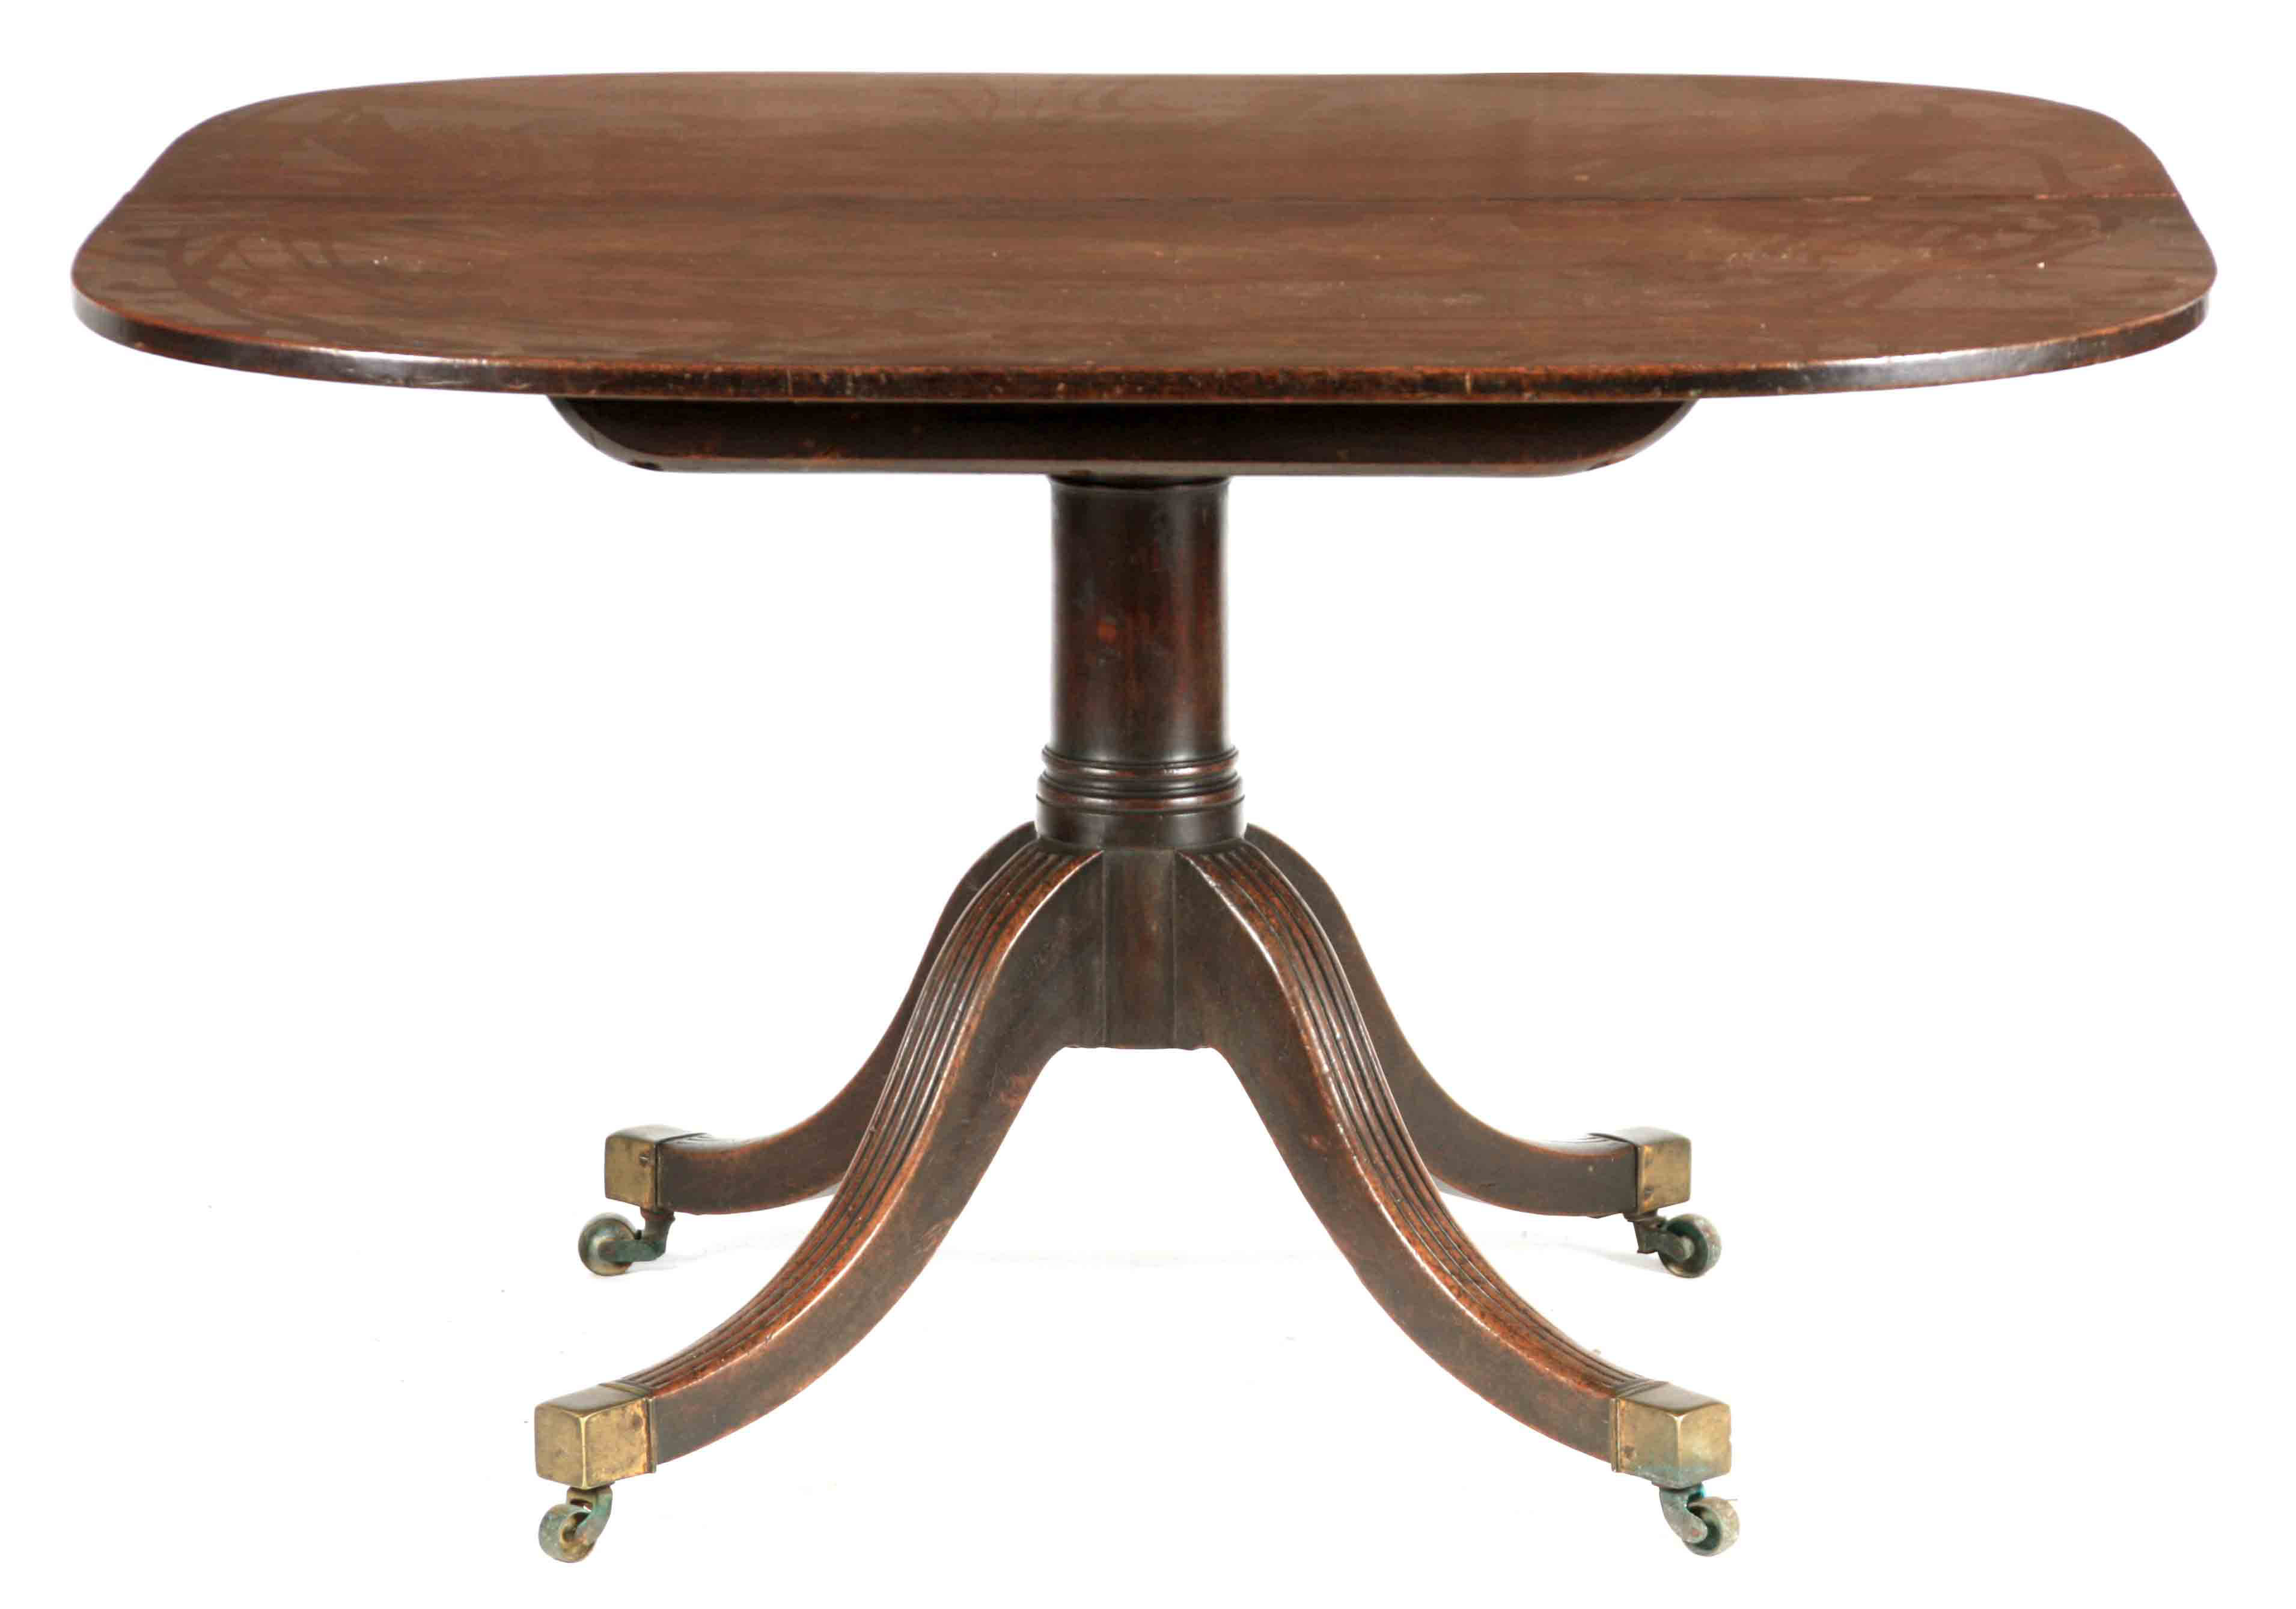 AN UNUSUAL MID 18TH CENTURY DROP LEAF PEDESTAL DINING TABLE with two-section top one being